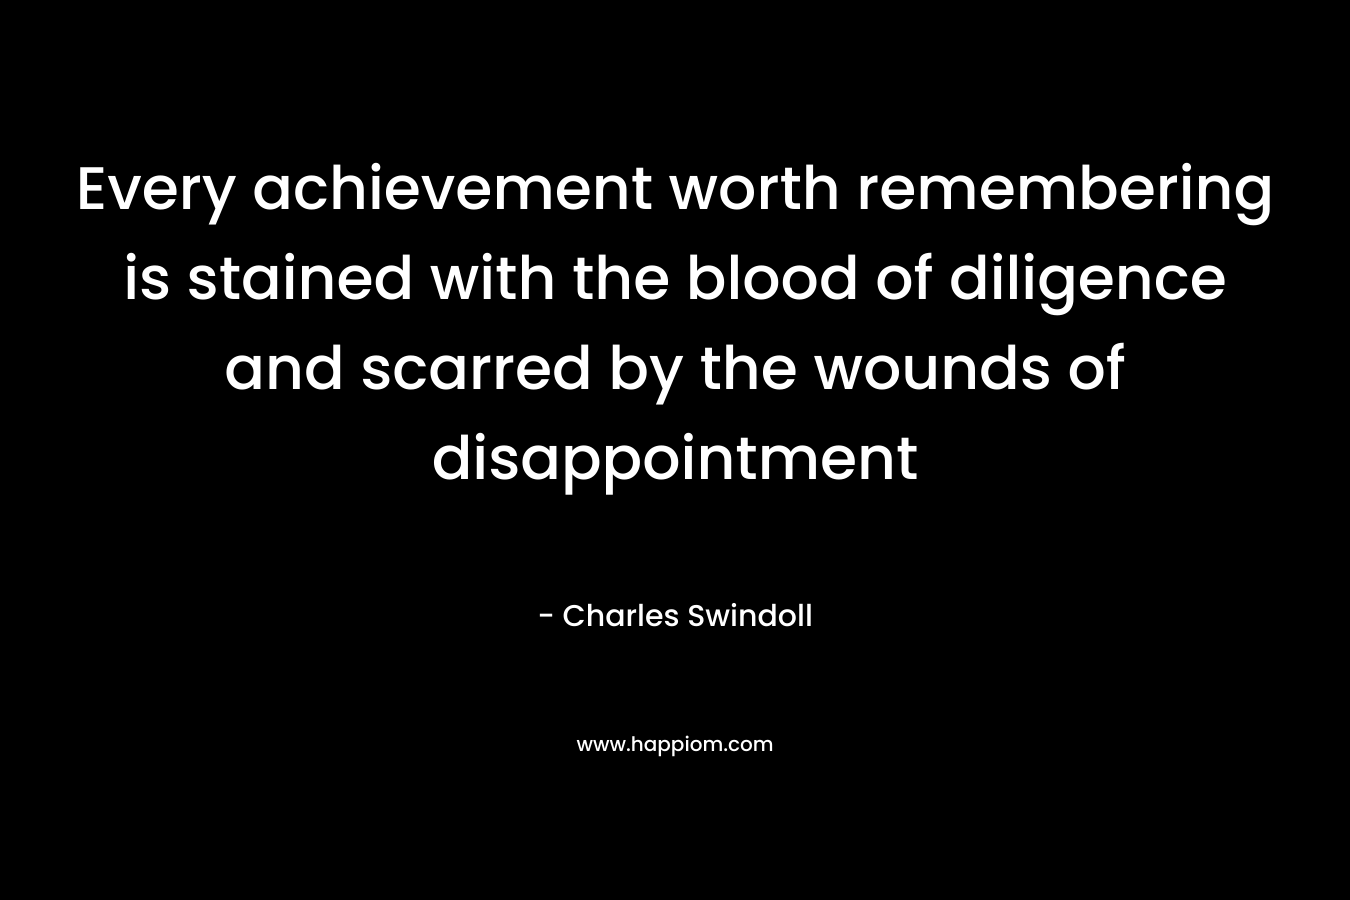 Every achievement worth remembering is stained with the blood of diligence and scarred by the wounds of disappointment